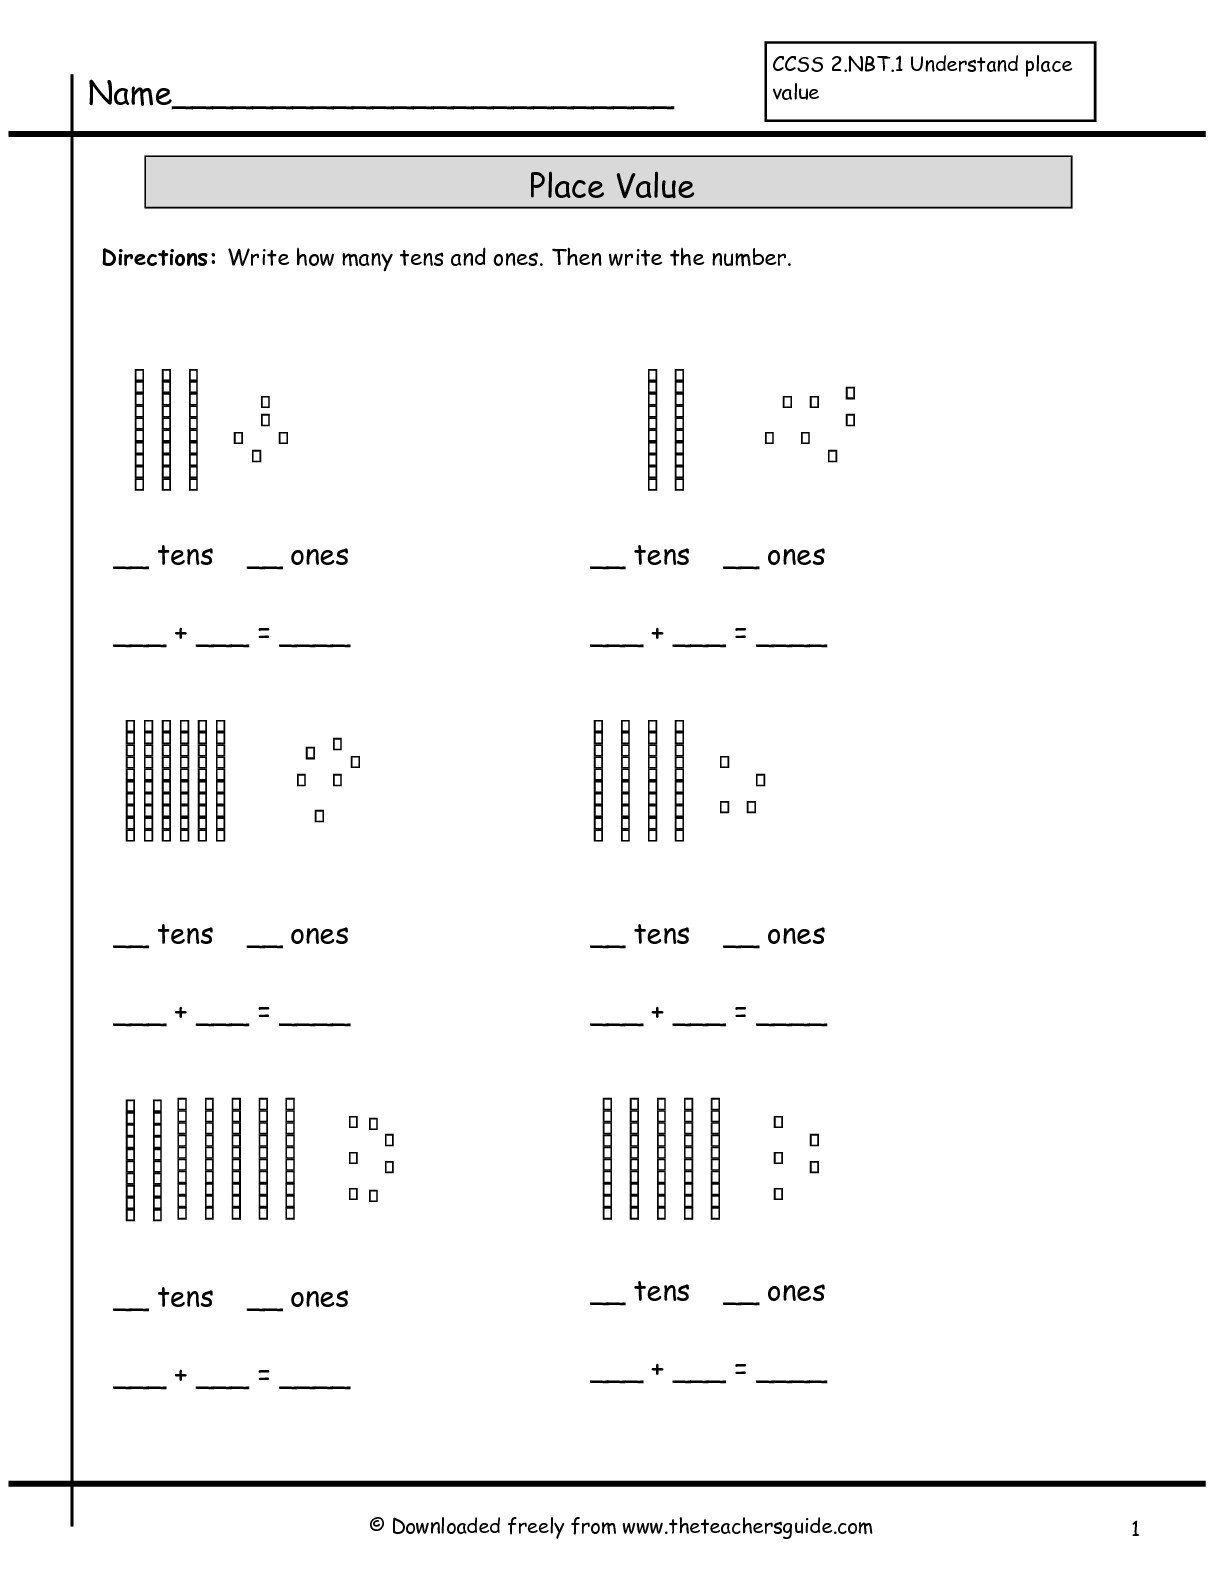 Place Value Worksheets With Rods And Units The Best Worksheets